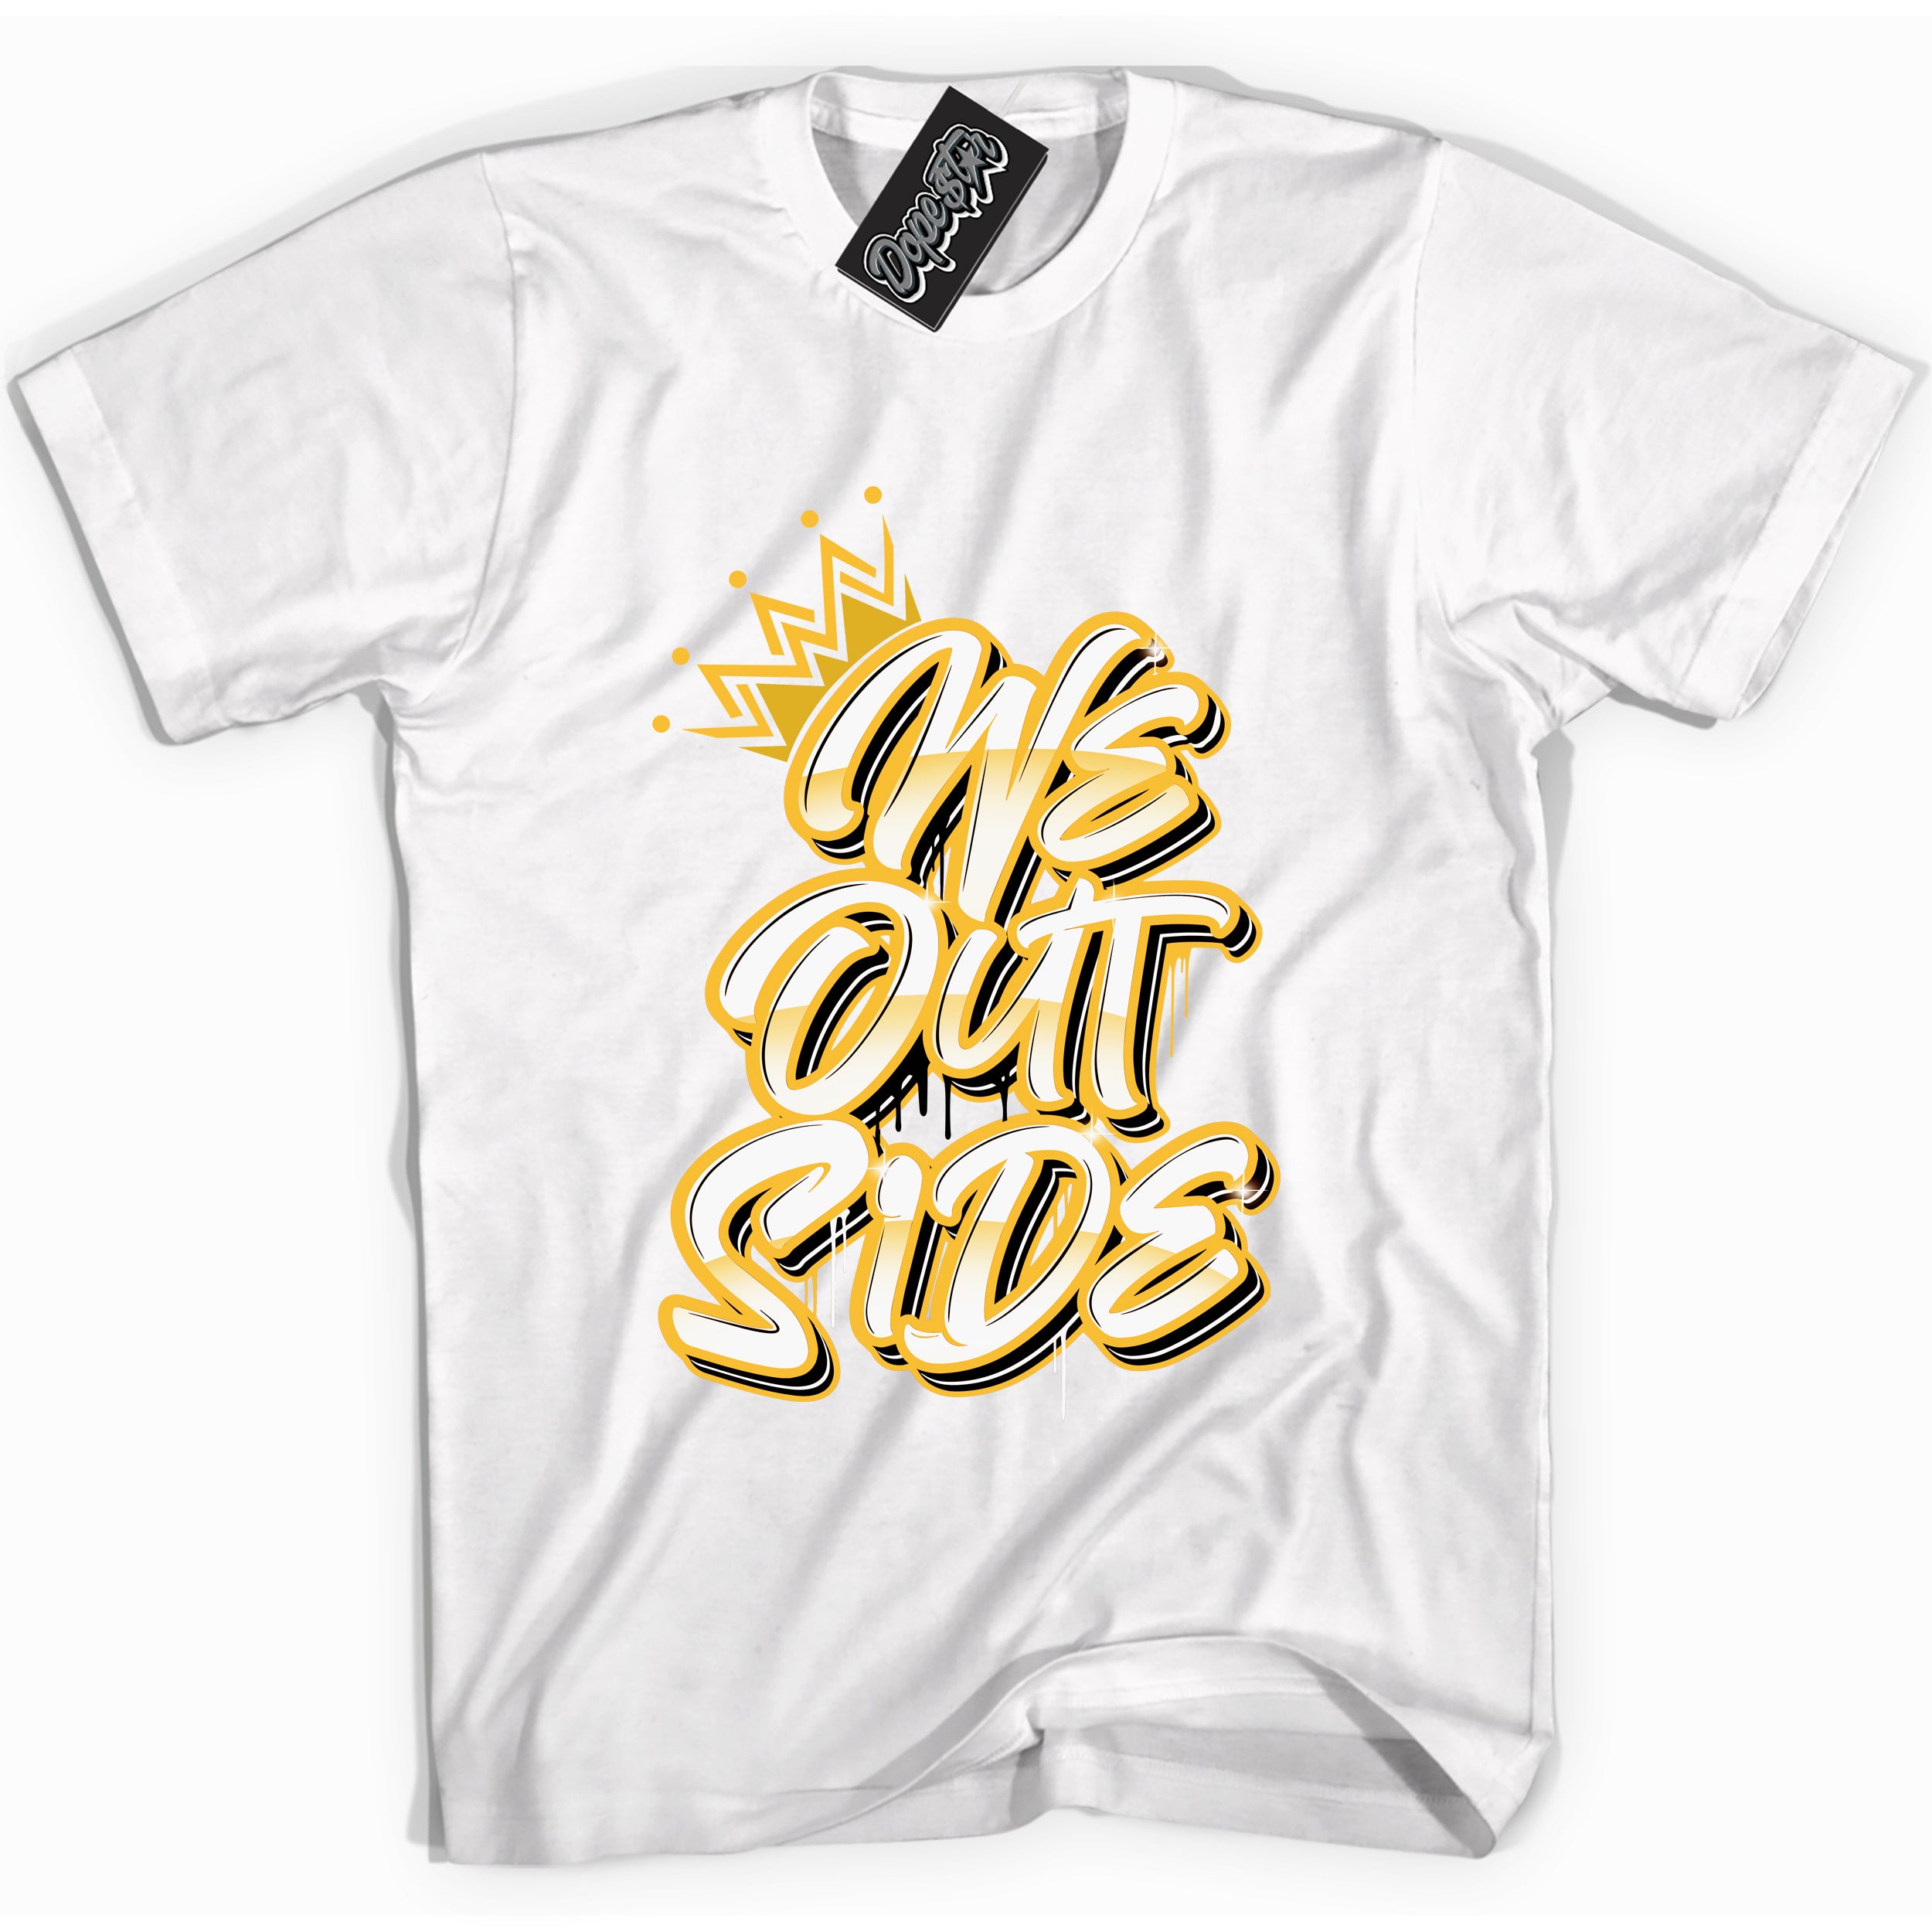 Cool white Shirt with “ We Outside ” design that perfectly matches Yellow Ochre 6s Sneakers.